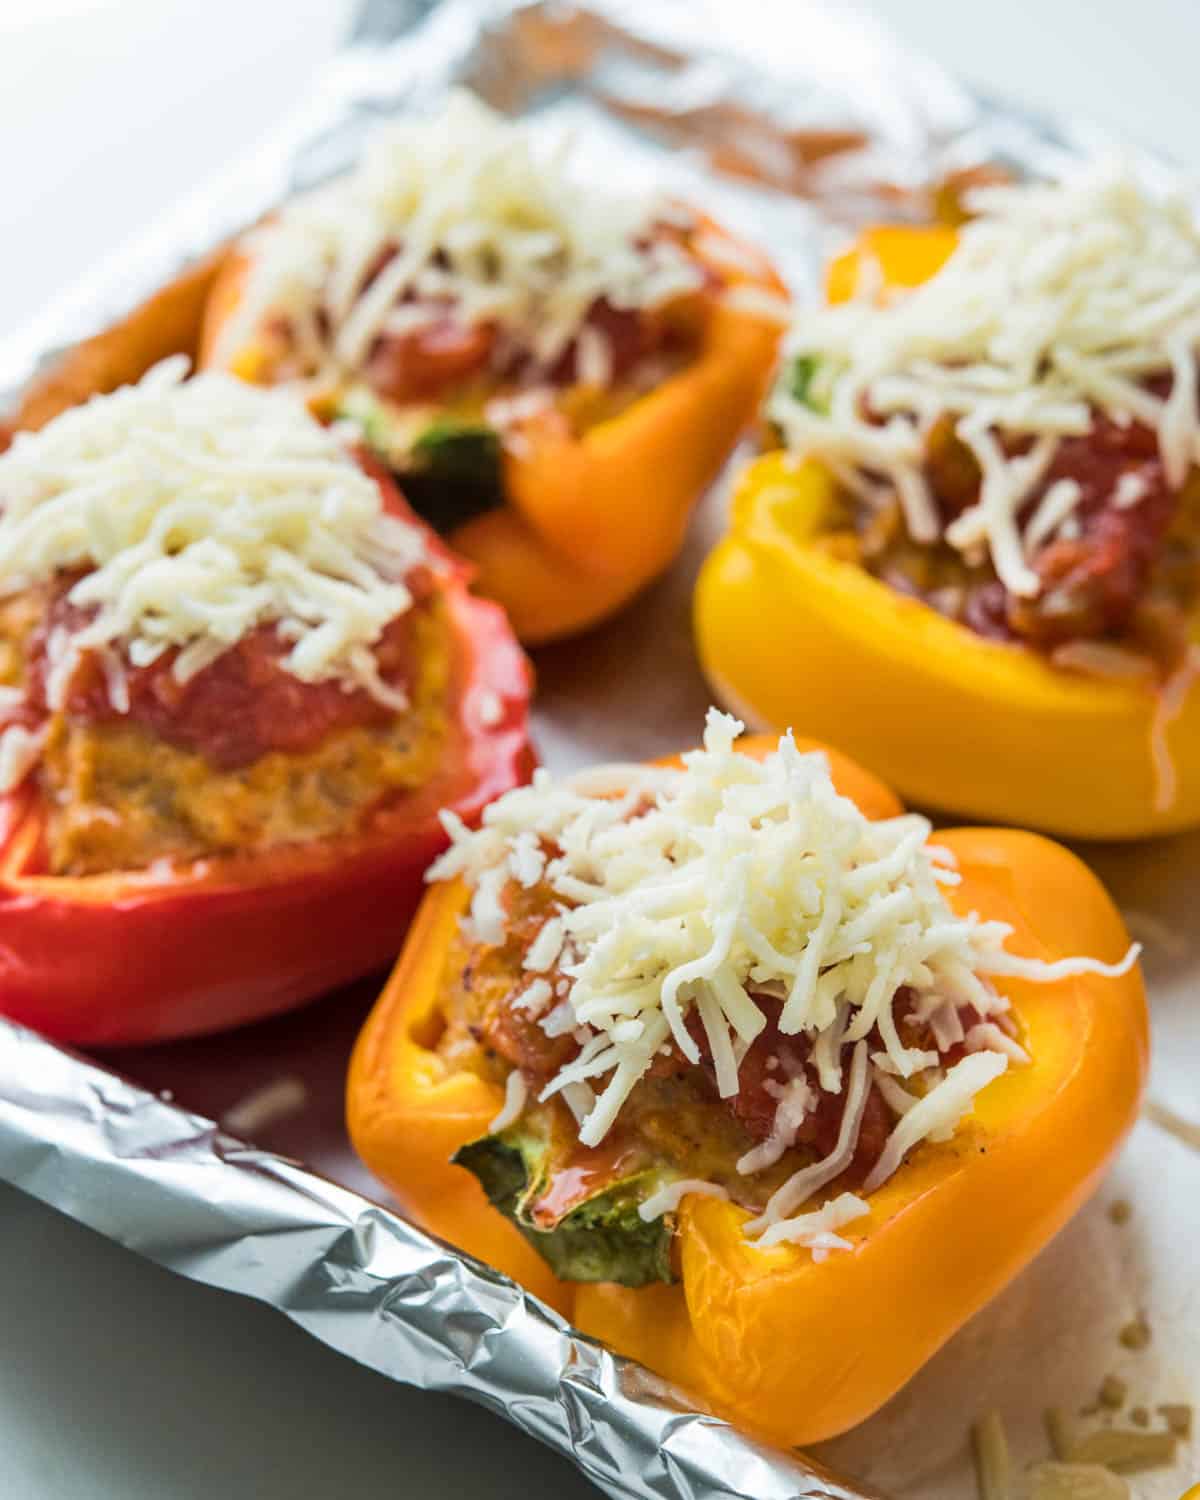 Adding salsa and cheese to the par-baked stuffed peppers.